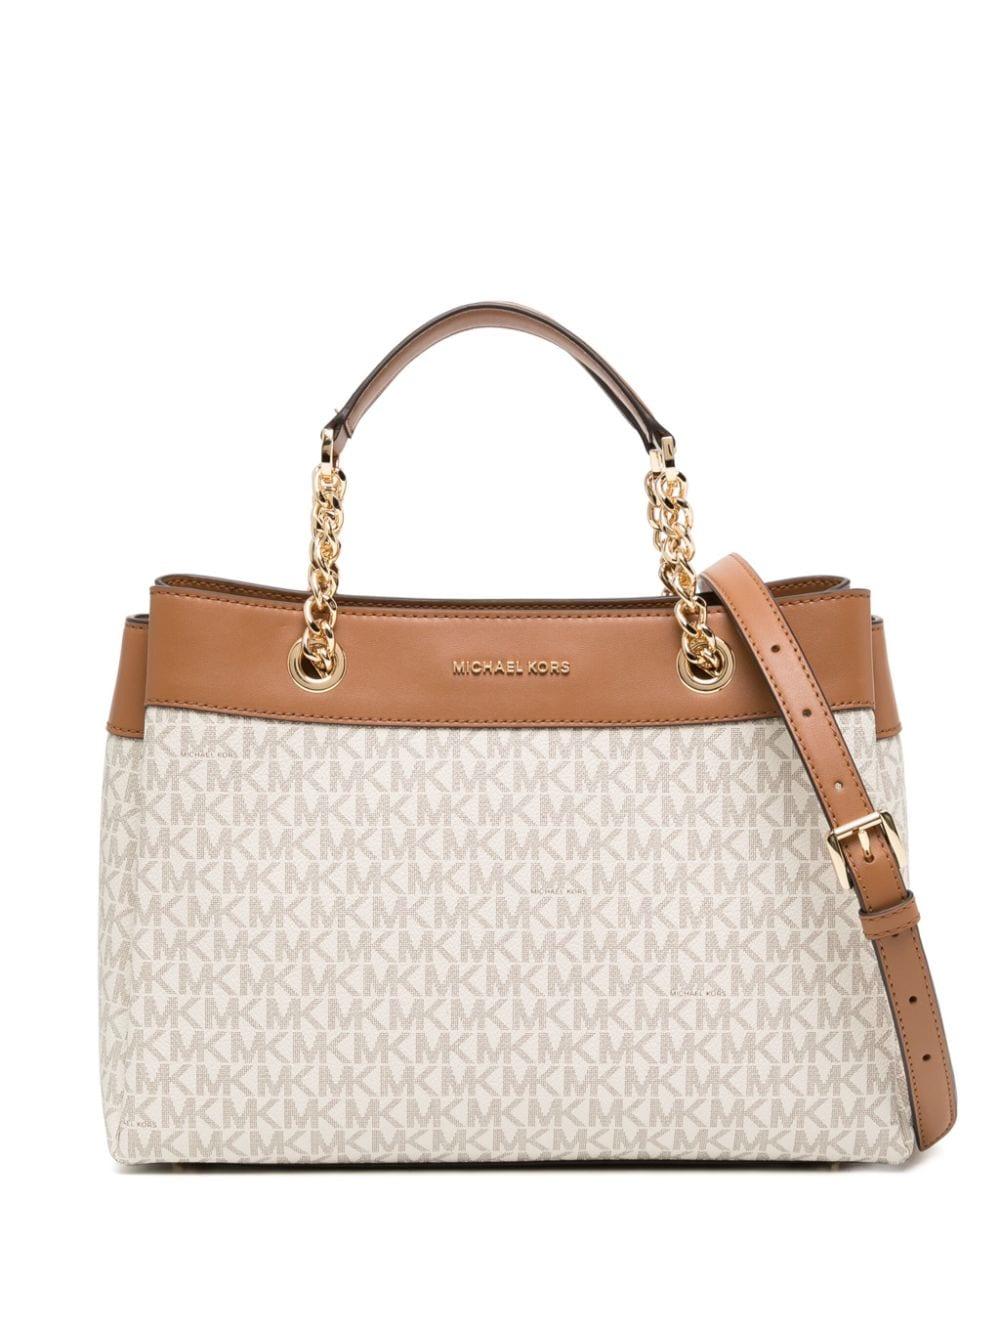 Elevate Your Style With Michael Kors Women's Handbags: Where Luxury Meets  Practicality | Michael kors clothes, Micheal kors handbag, Micheal kors bags